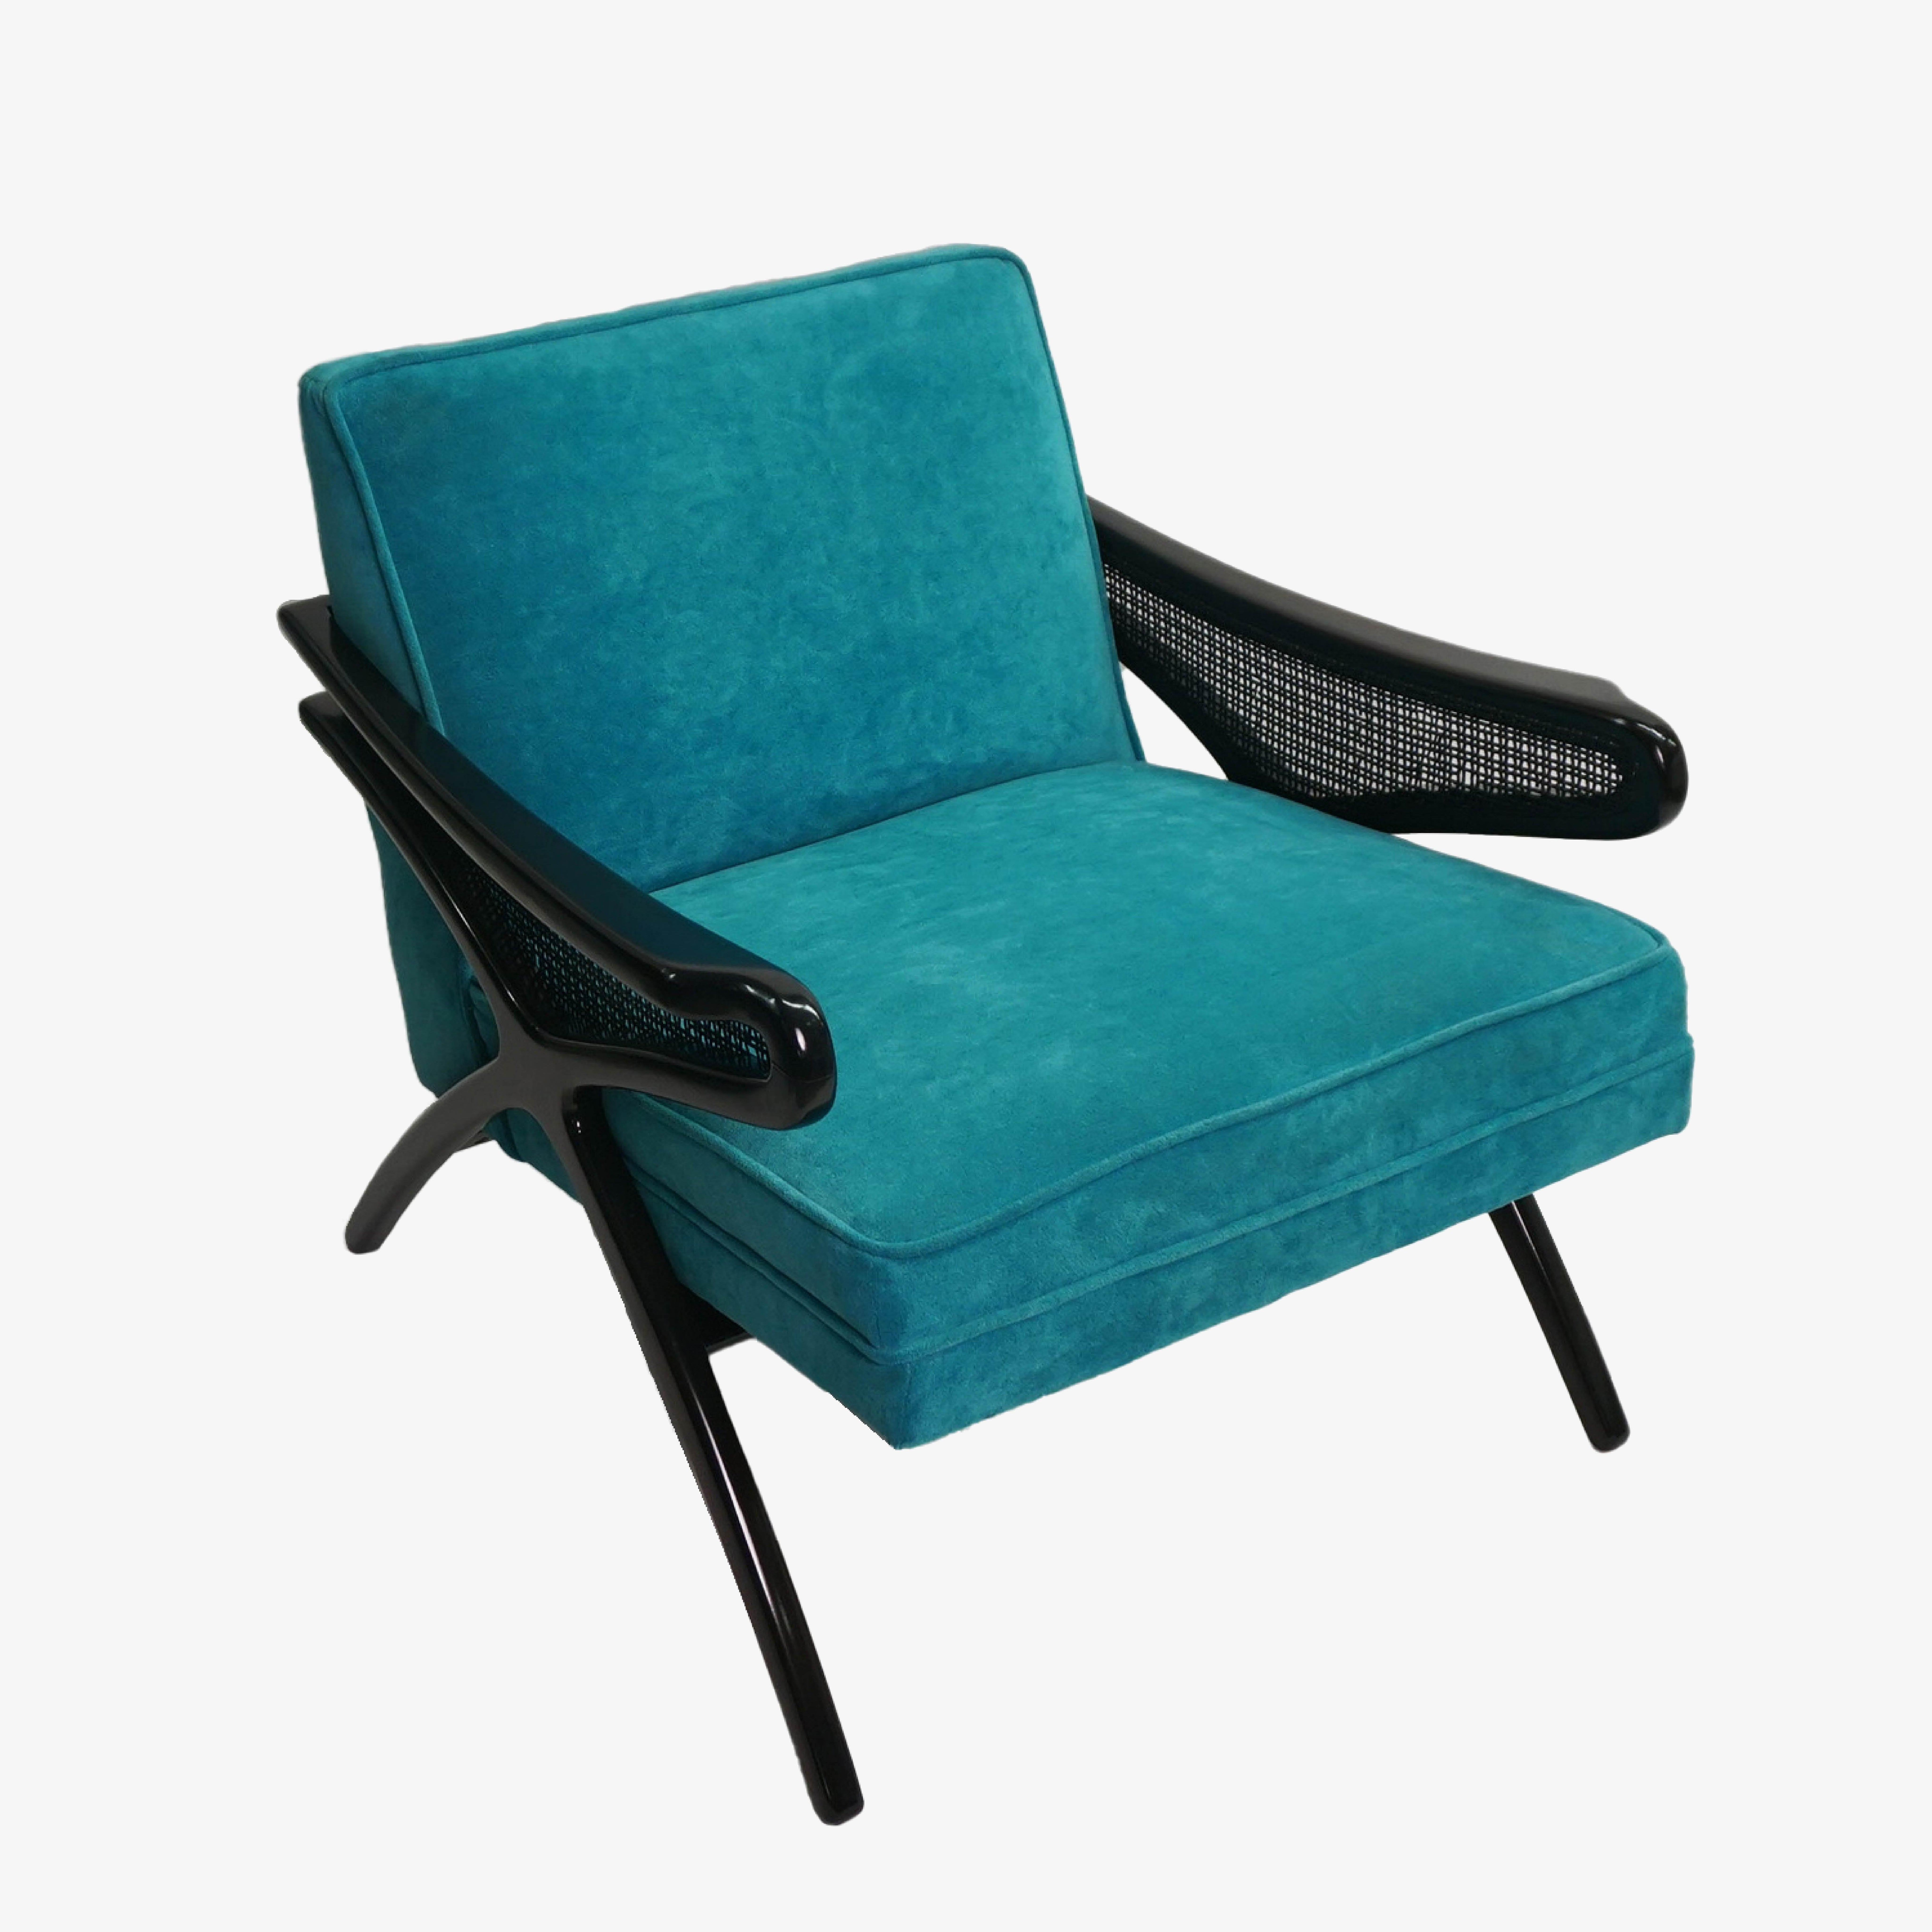 Offering a newly restored Mid-Century Modern Butterfly Lounge Chair, circa 1960, in peacock blue velvet. The frame, crafted in walnut, has been ebonized for striking contrast. There are small points of wear to caning on the arms, but shows very well